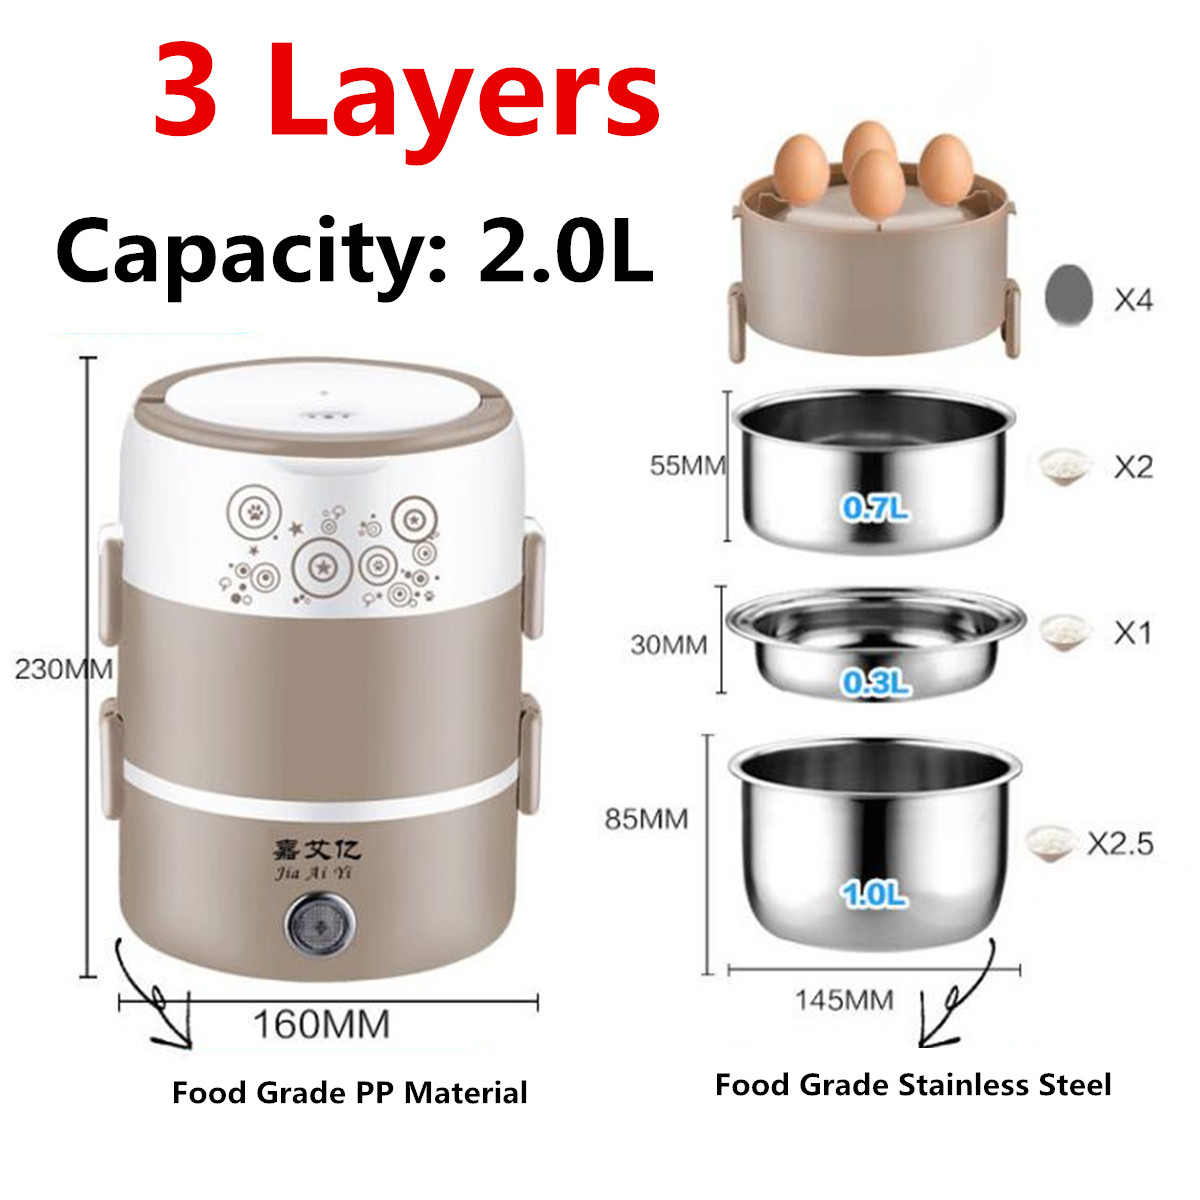 2L Mini Stainless Steel 3 Layers Electric Rice Cooker Steamer Portable Meal Thermal Heating Lunch Box Food Container Warmer